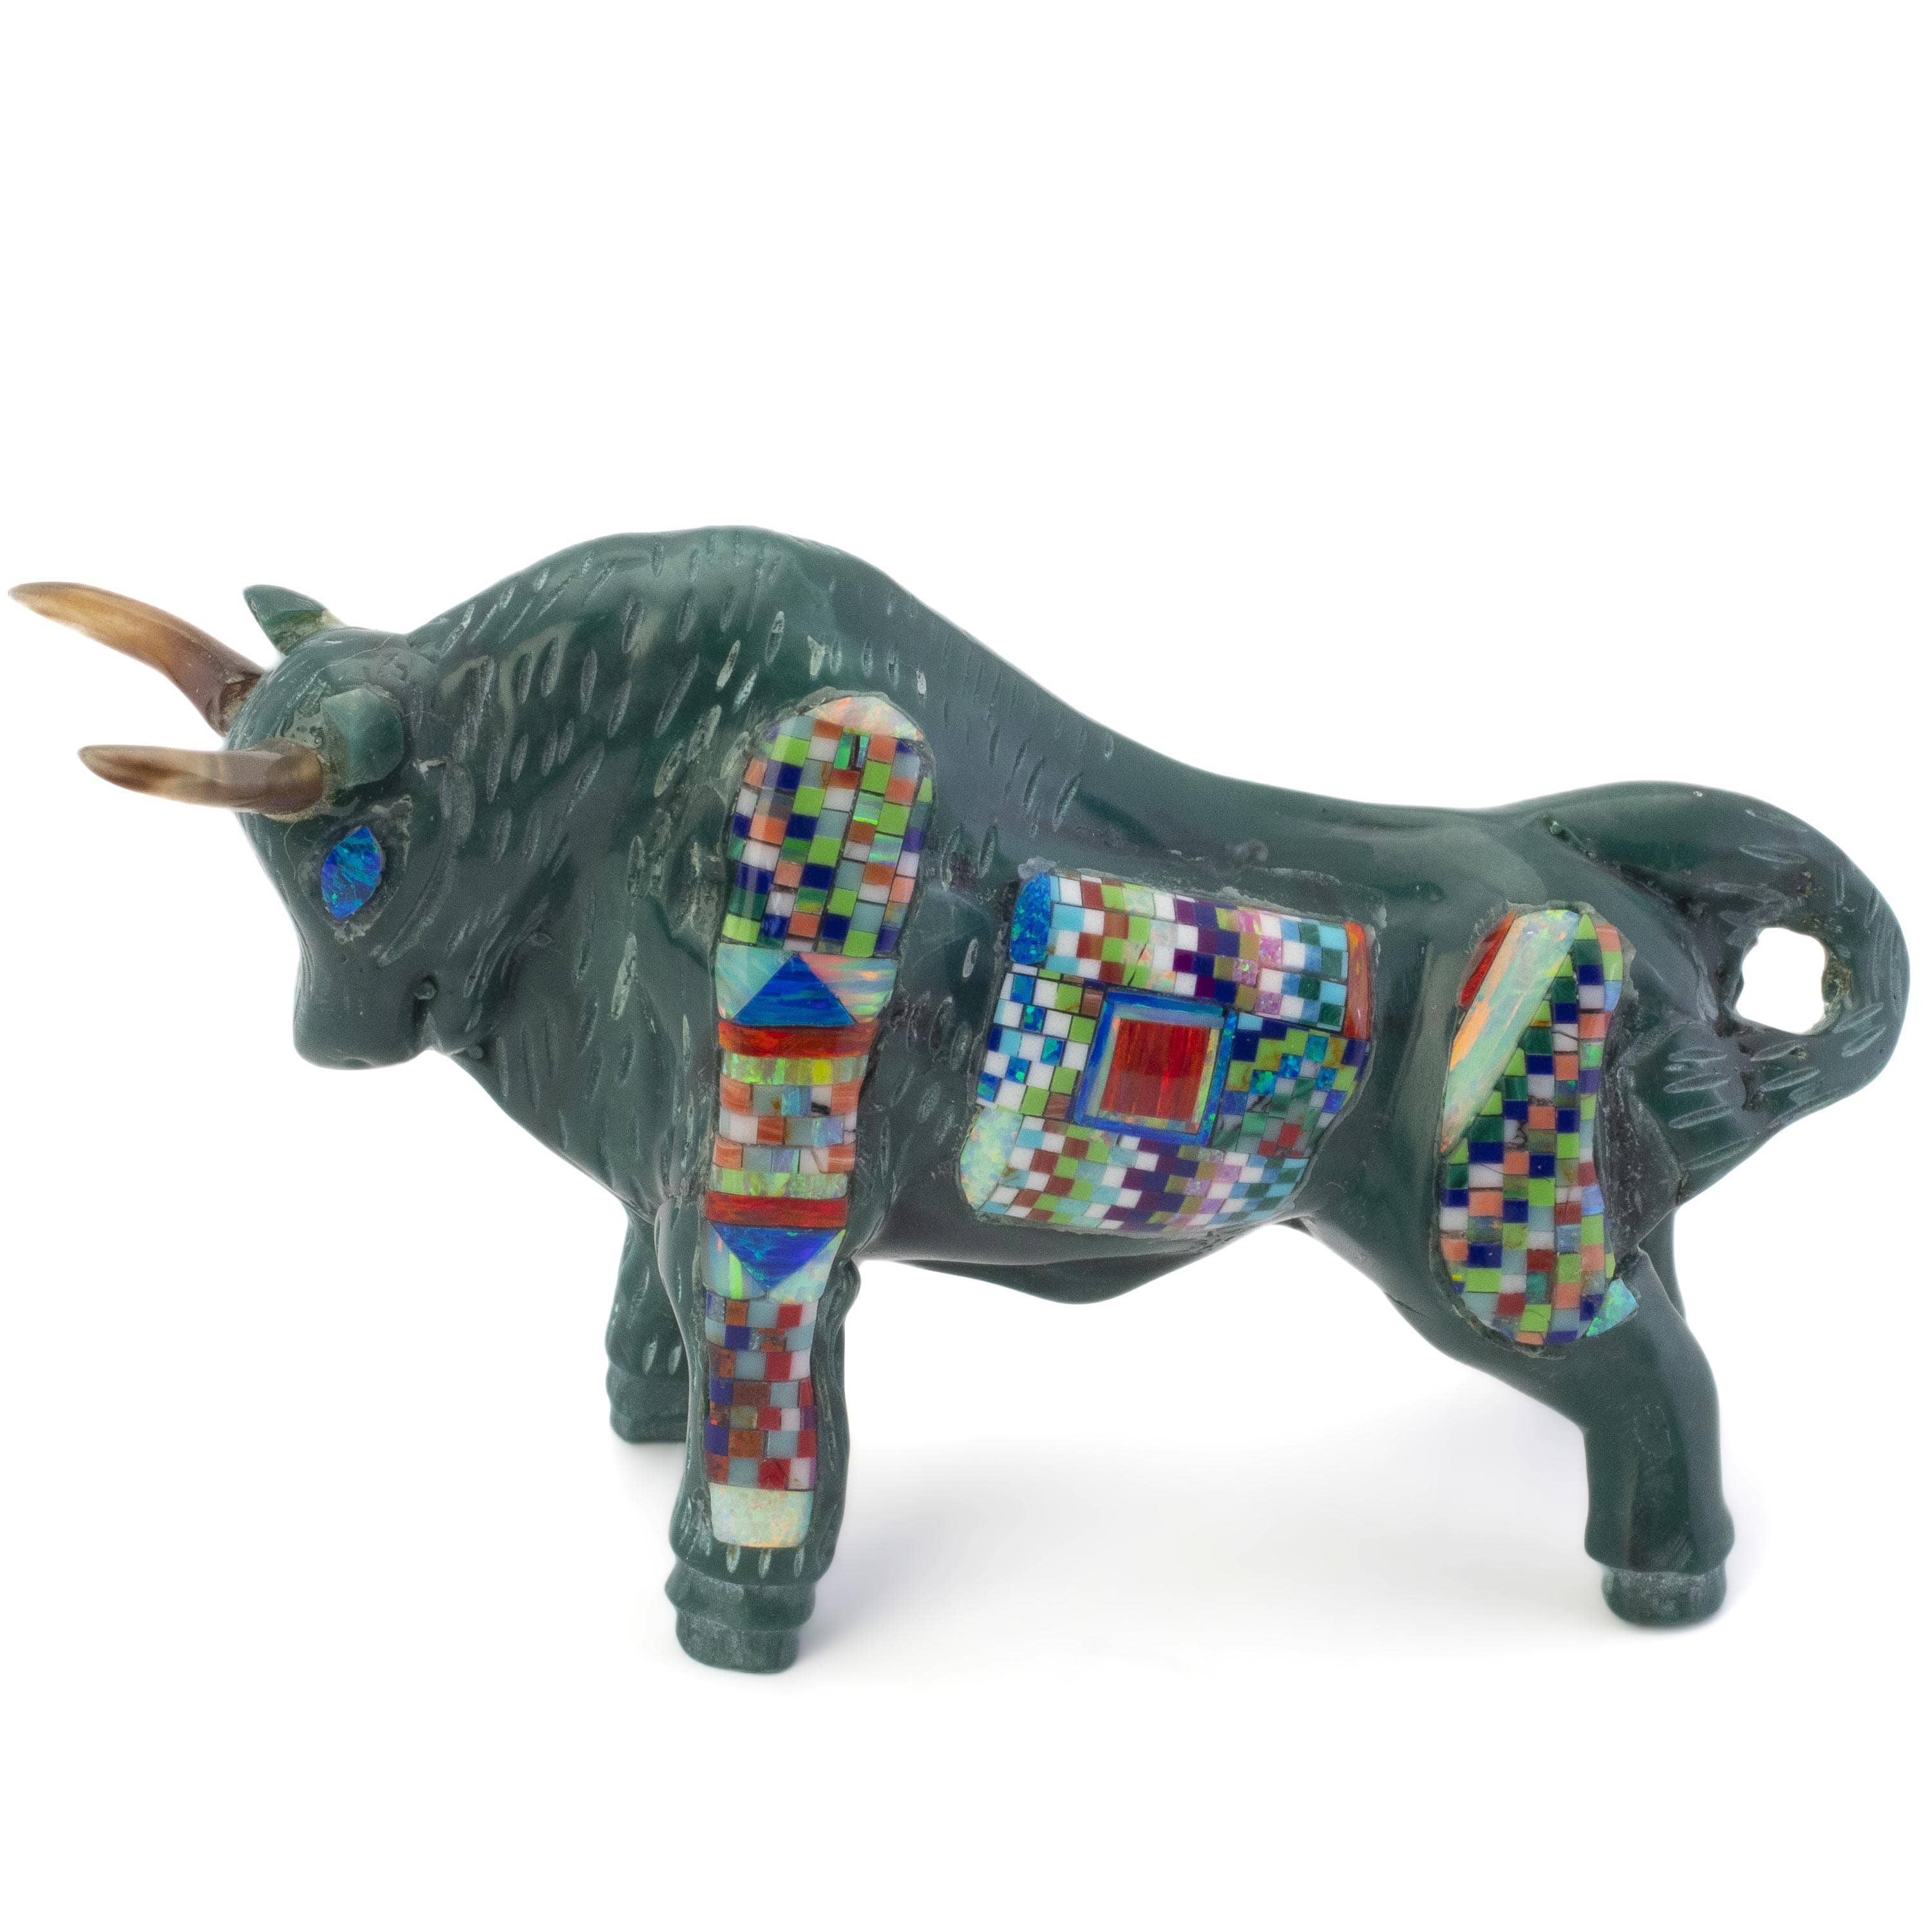 KALIFANO Southwest Silver Jewelry Multi Gem Opal Micro Inlay Handmade Green Enhanced Turquoise Bull Carving AKC800.001